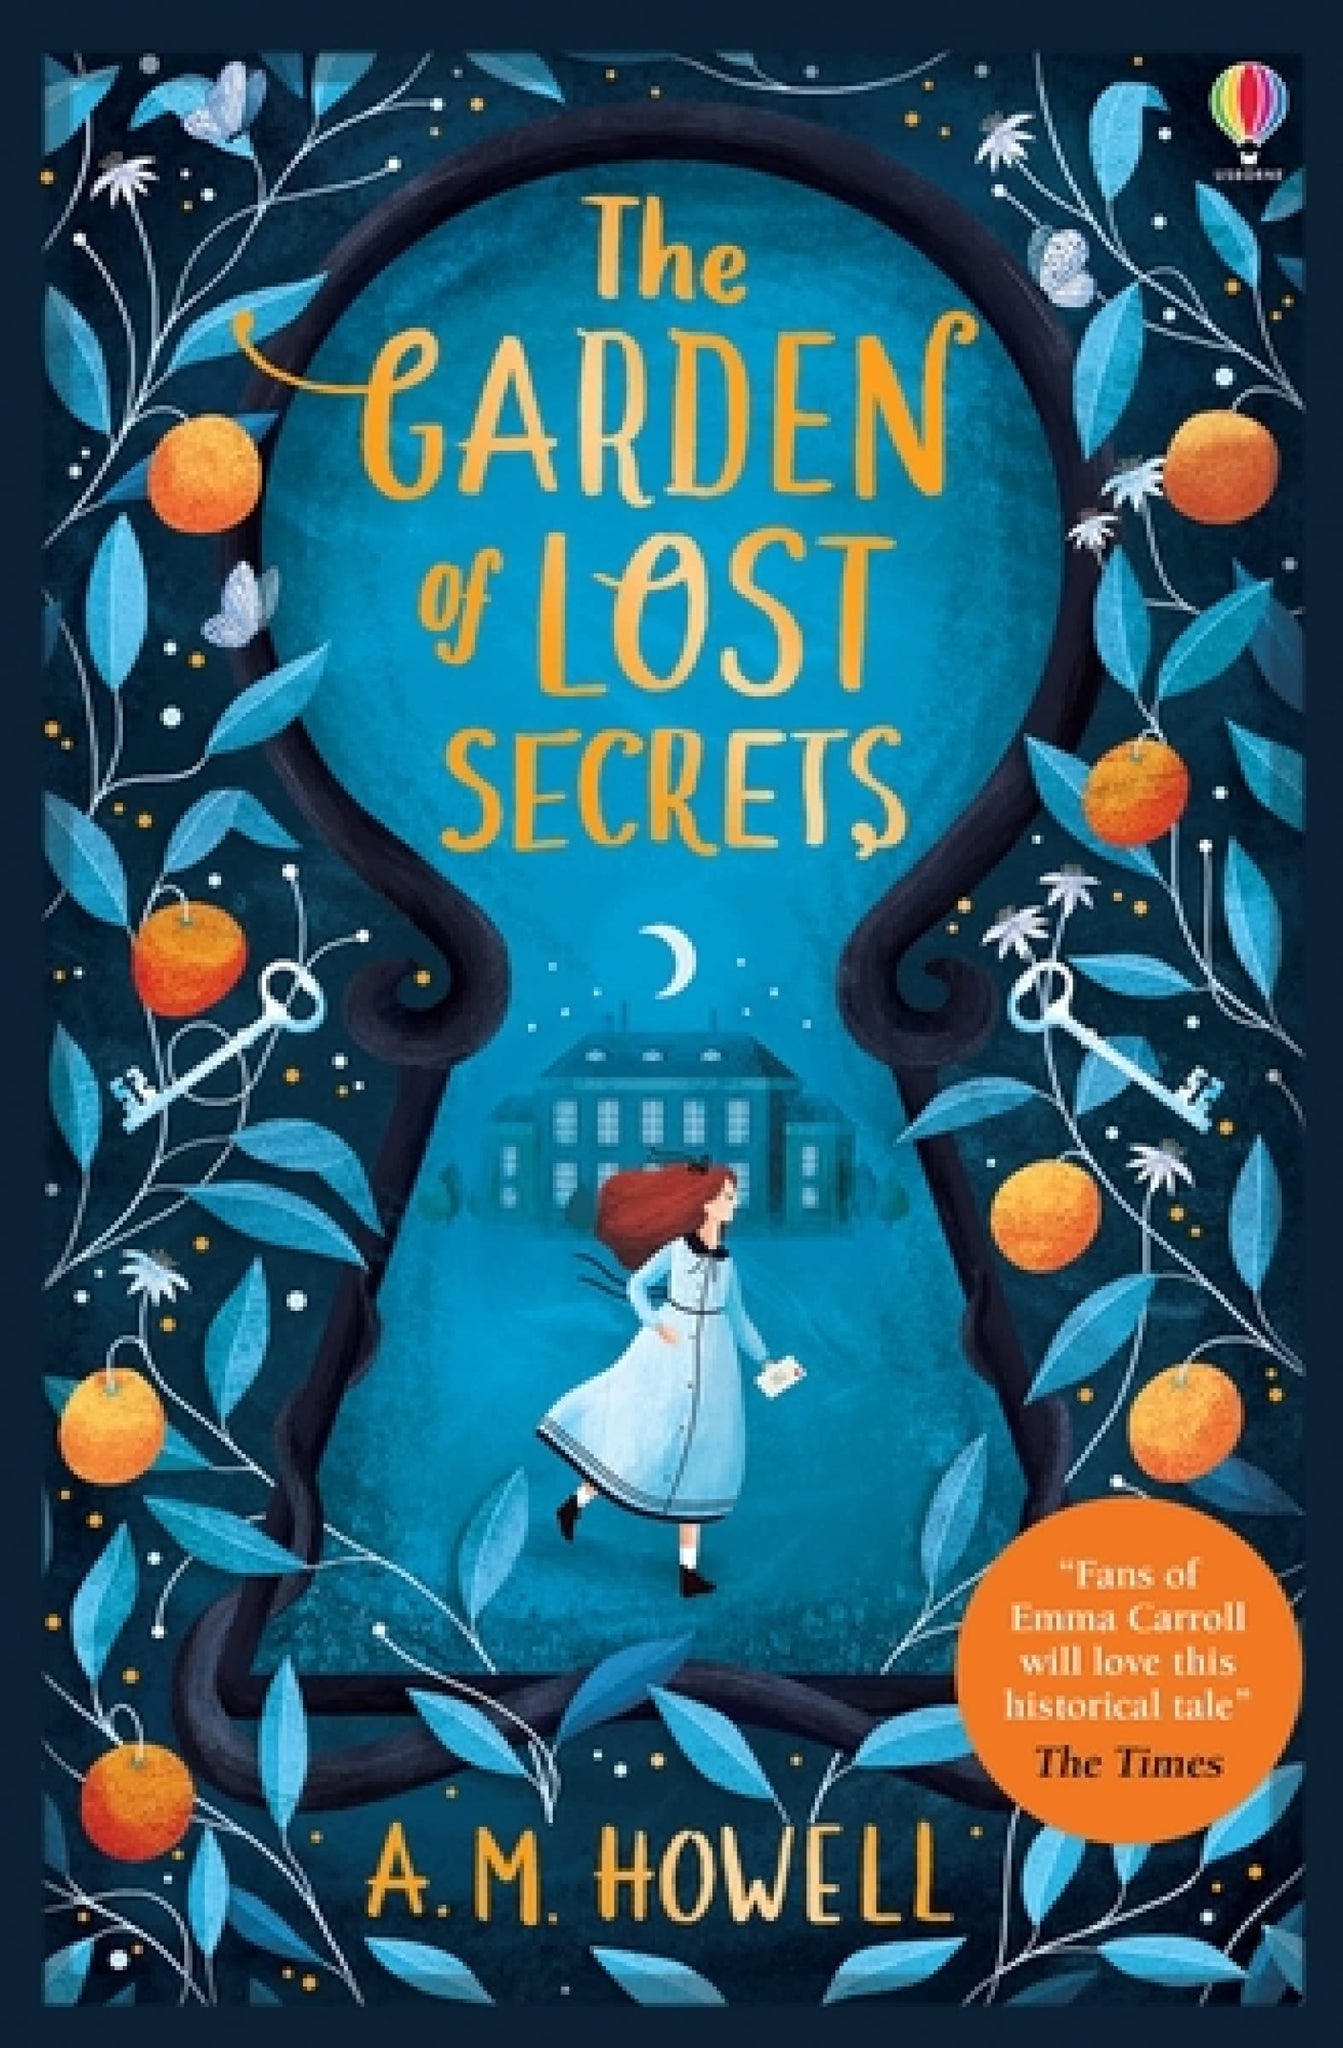 The Garden of Lost Secrets - A.M. Howell